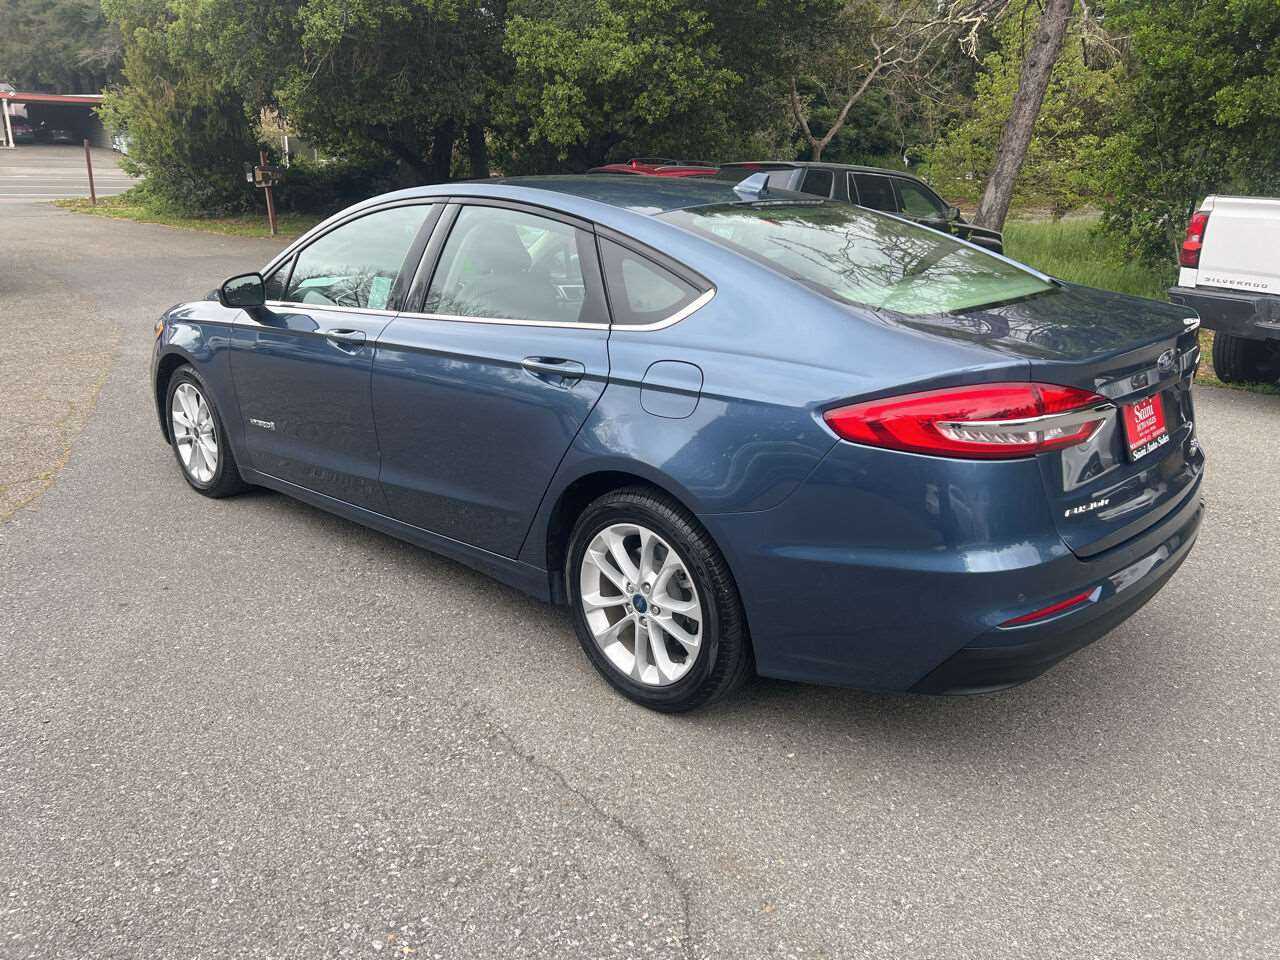 Ford Fusion Hybrid Image 4